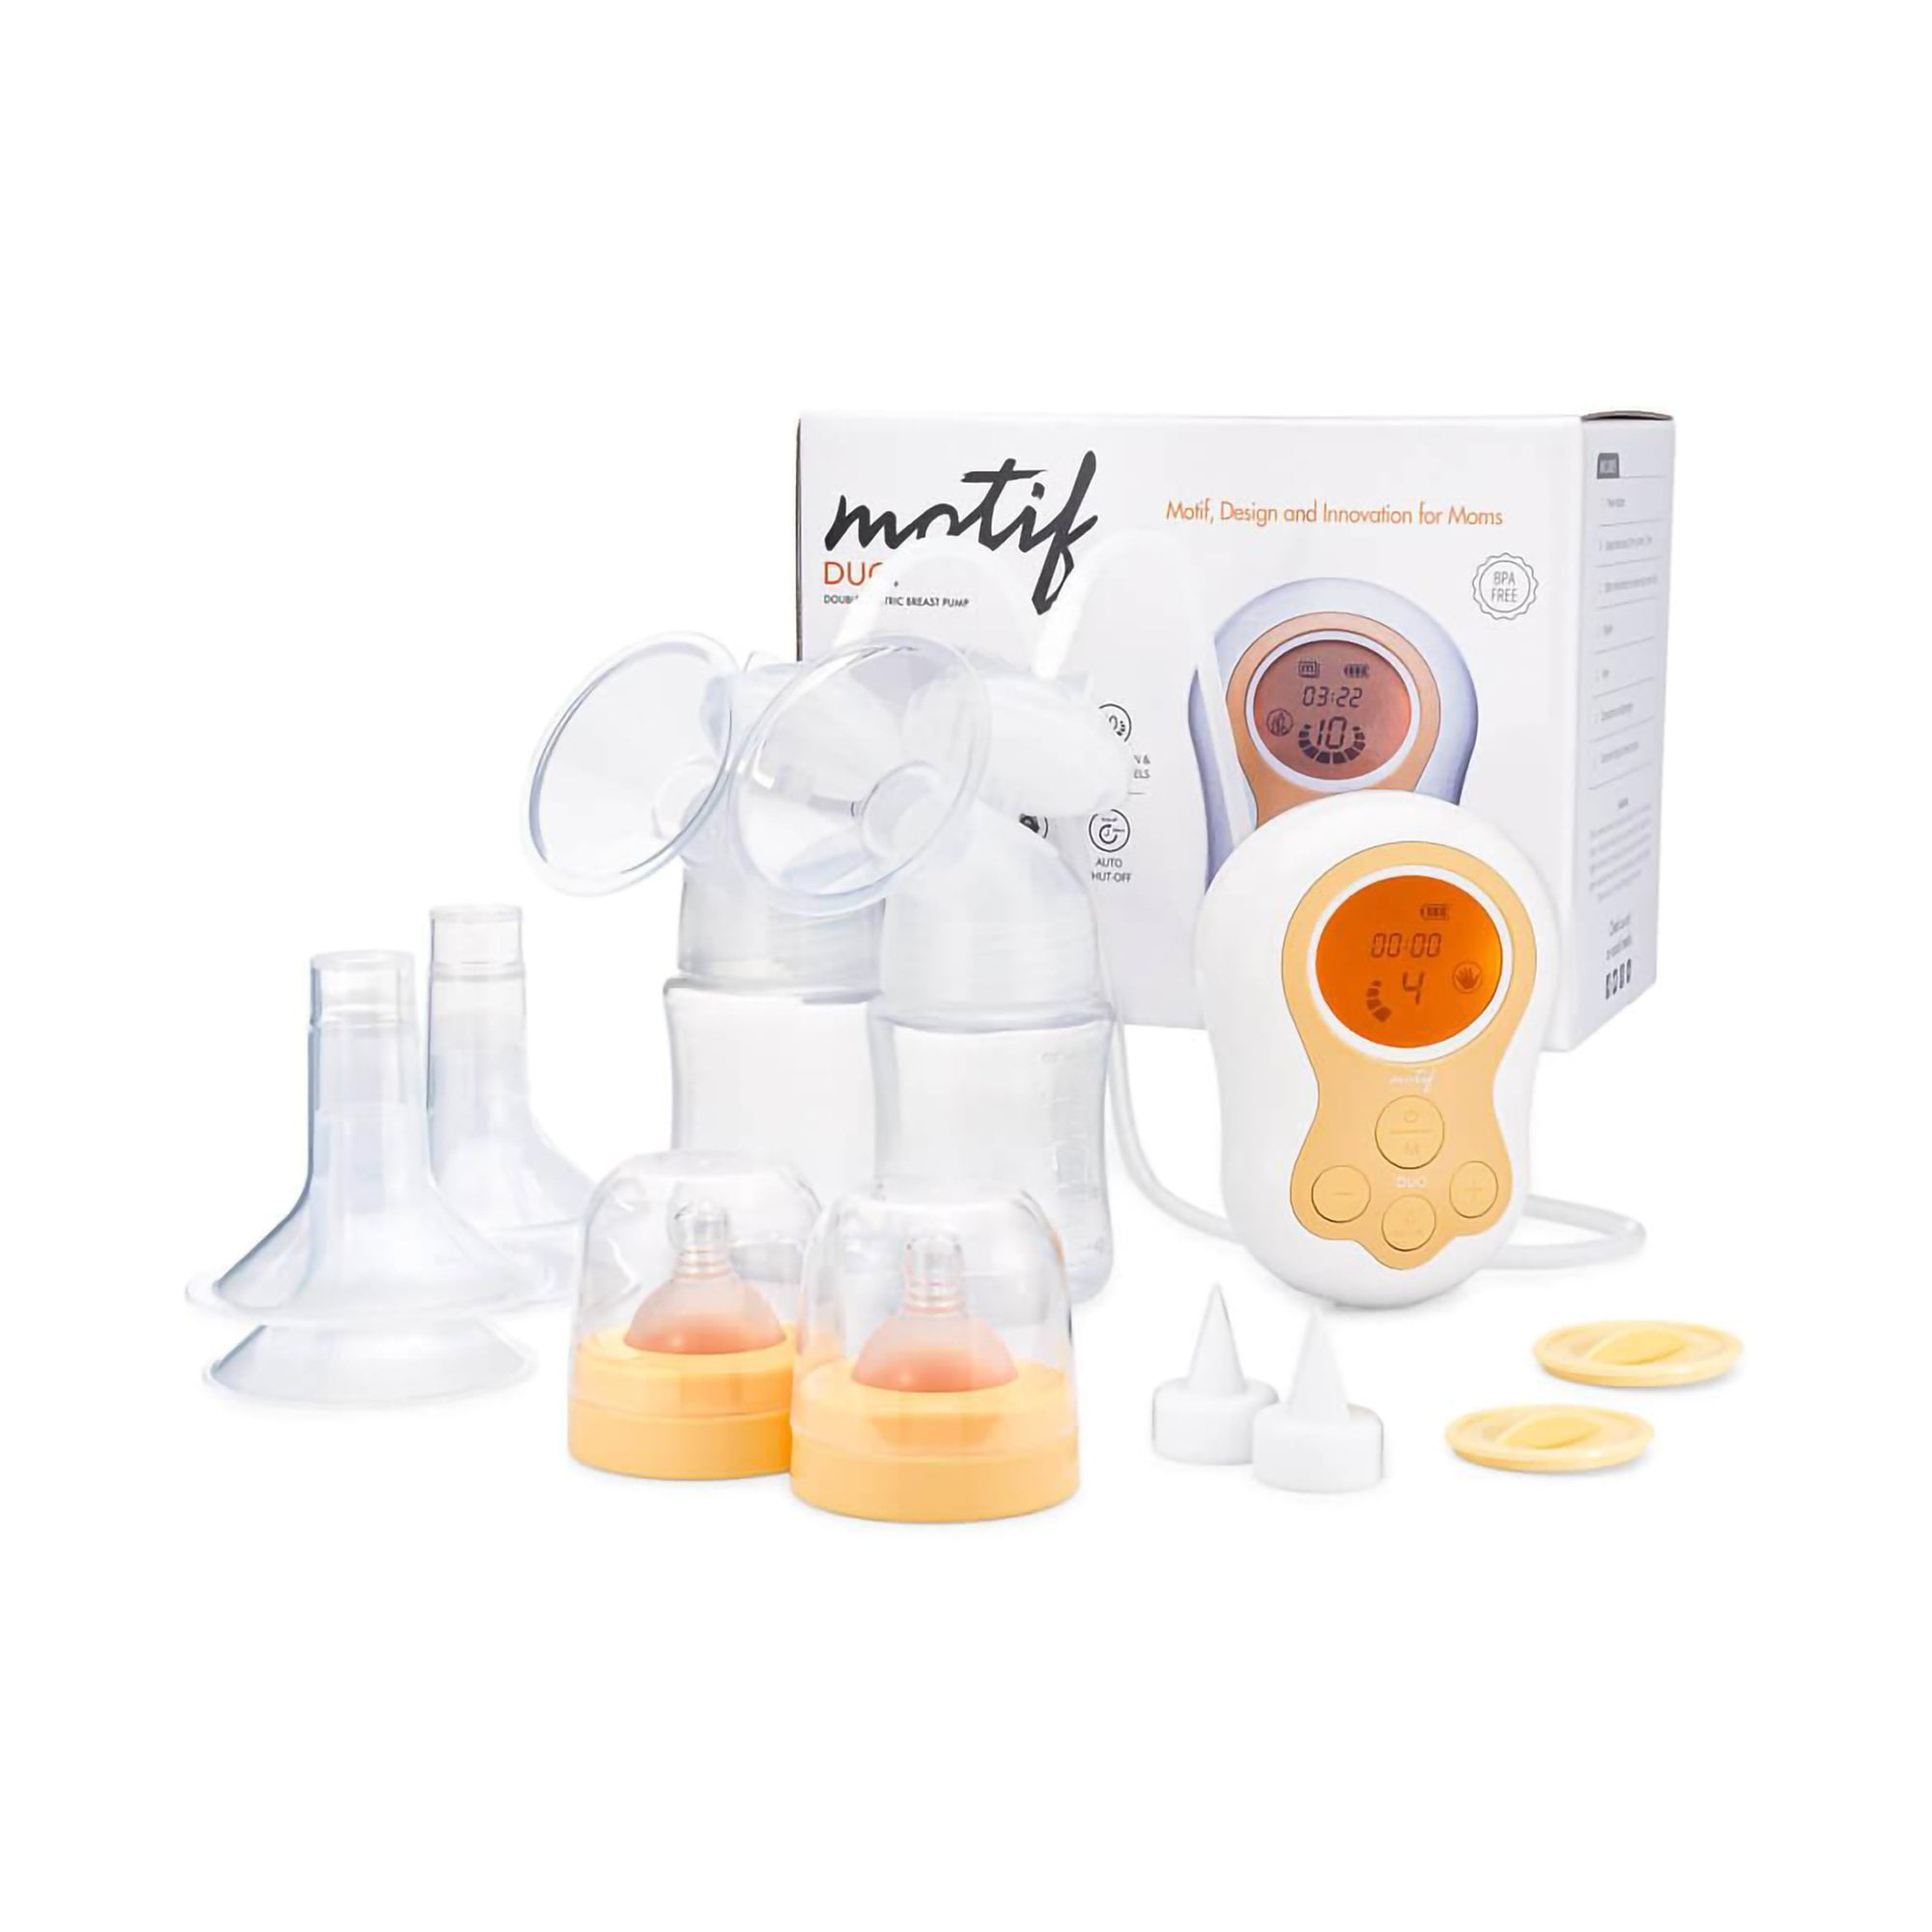 Motif Medical Duo Double Electric Breast Pump with Maylilly Bag